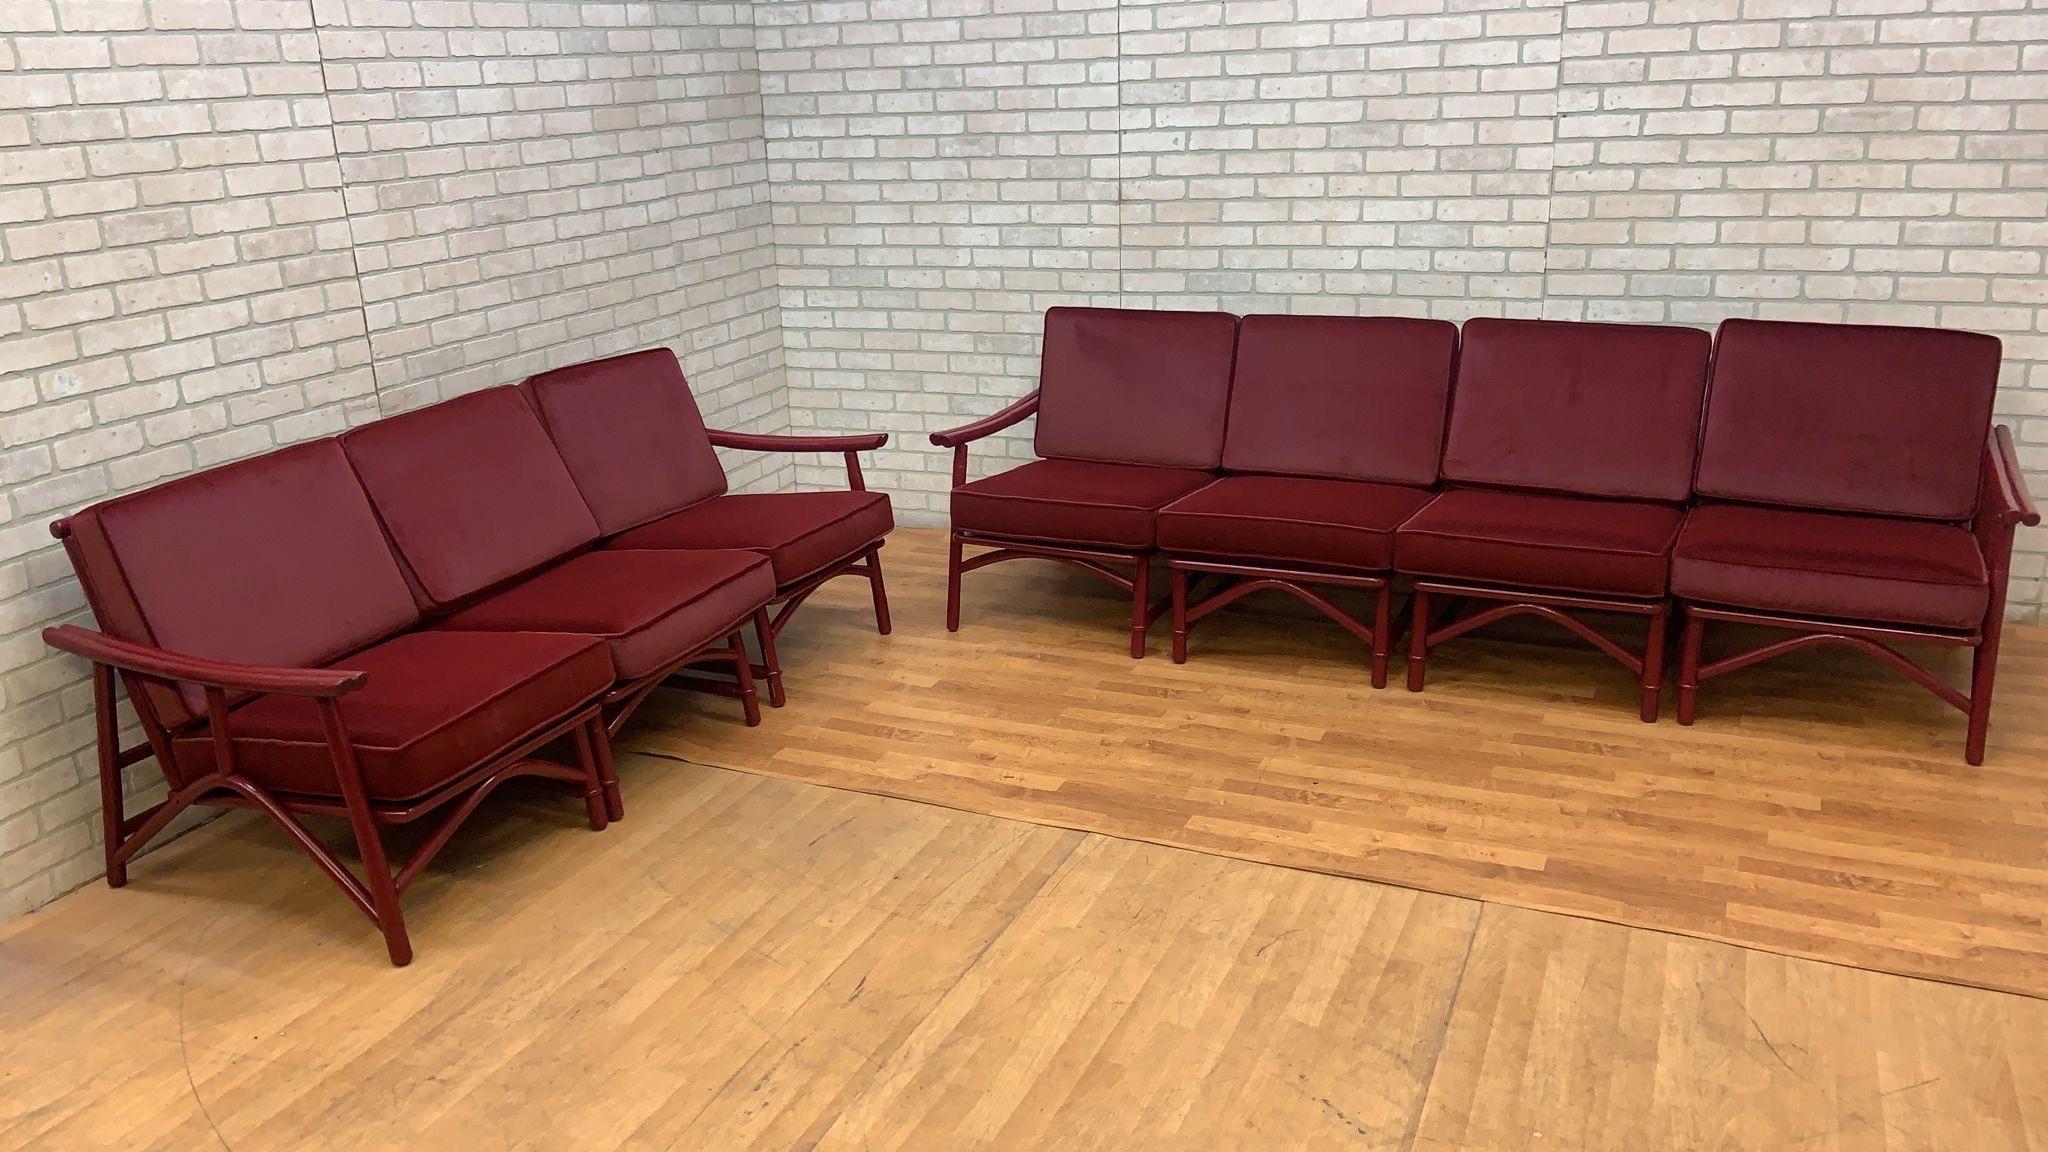 Vintage Midcentury Asian Style 7 Piece Modular Sectional Sofa Set by John Wiser For Sale 8